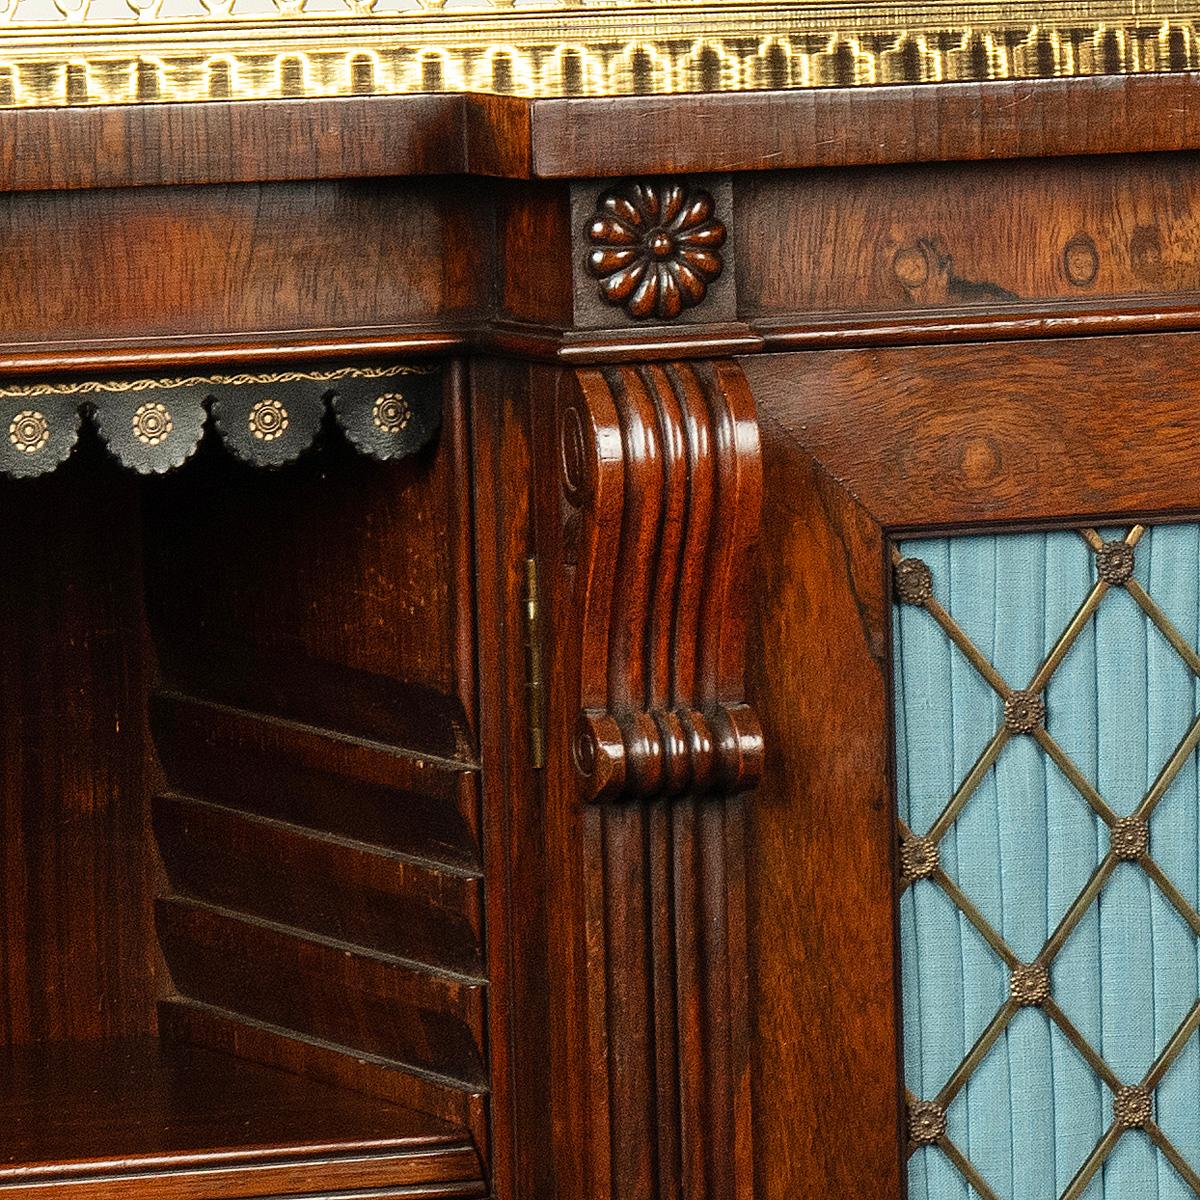 A late Regency rosewood breakfront side cabinet attributed to Gillows, of long rectangular form with an ormolu gallery a two central doors flanked by adjustable shelves within reeded pilasters with scroll corbels, the shelves with later leather dust